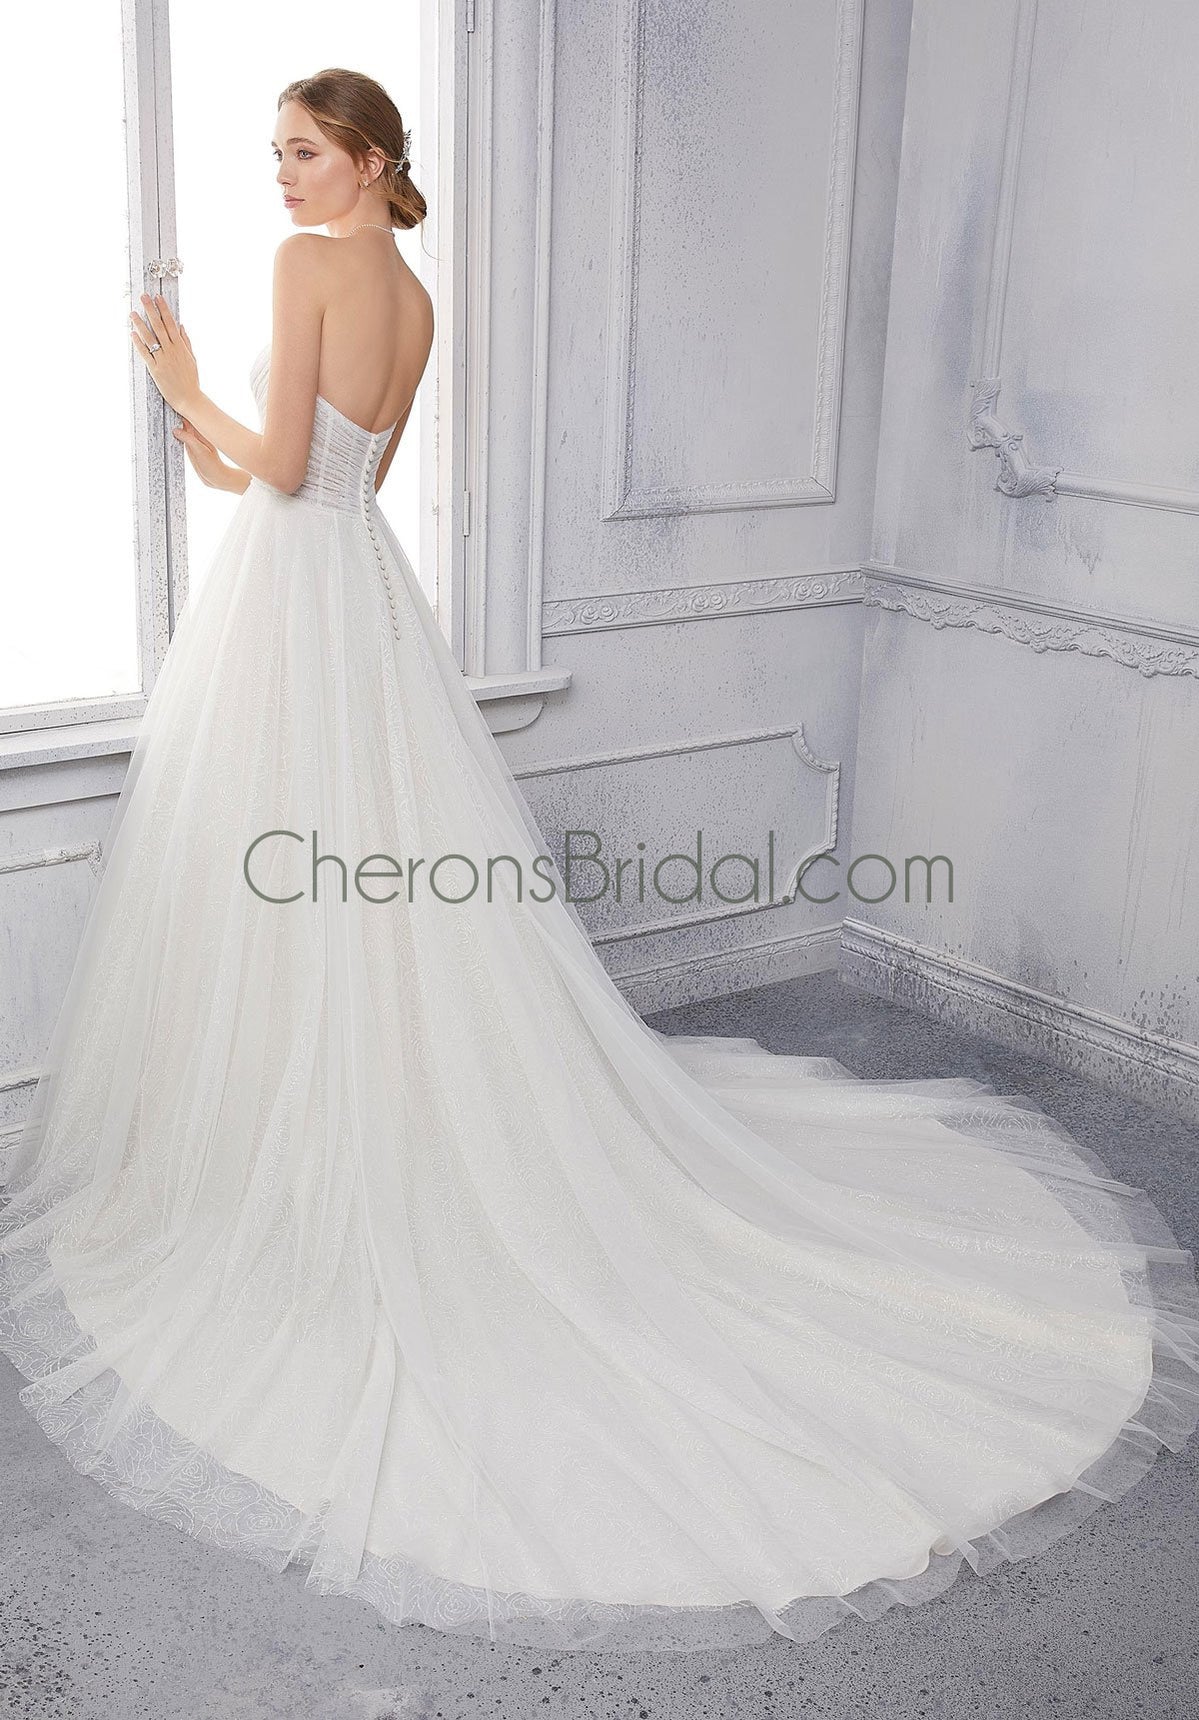 Blu - 5928 - Charlize - Cheron's Bridal, Wedding Gown - Morilee Blu - - Wedding Gowns Dresses Chattanooga Hixson Shops Boutiques Tennessee TN Georgia GA MSRP Lowest Prices Sale Discount